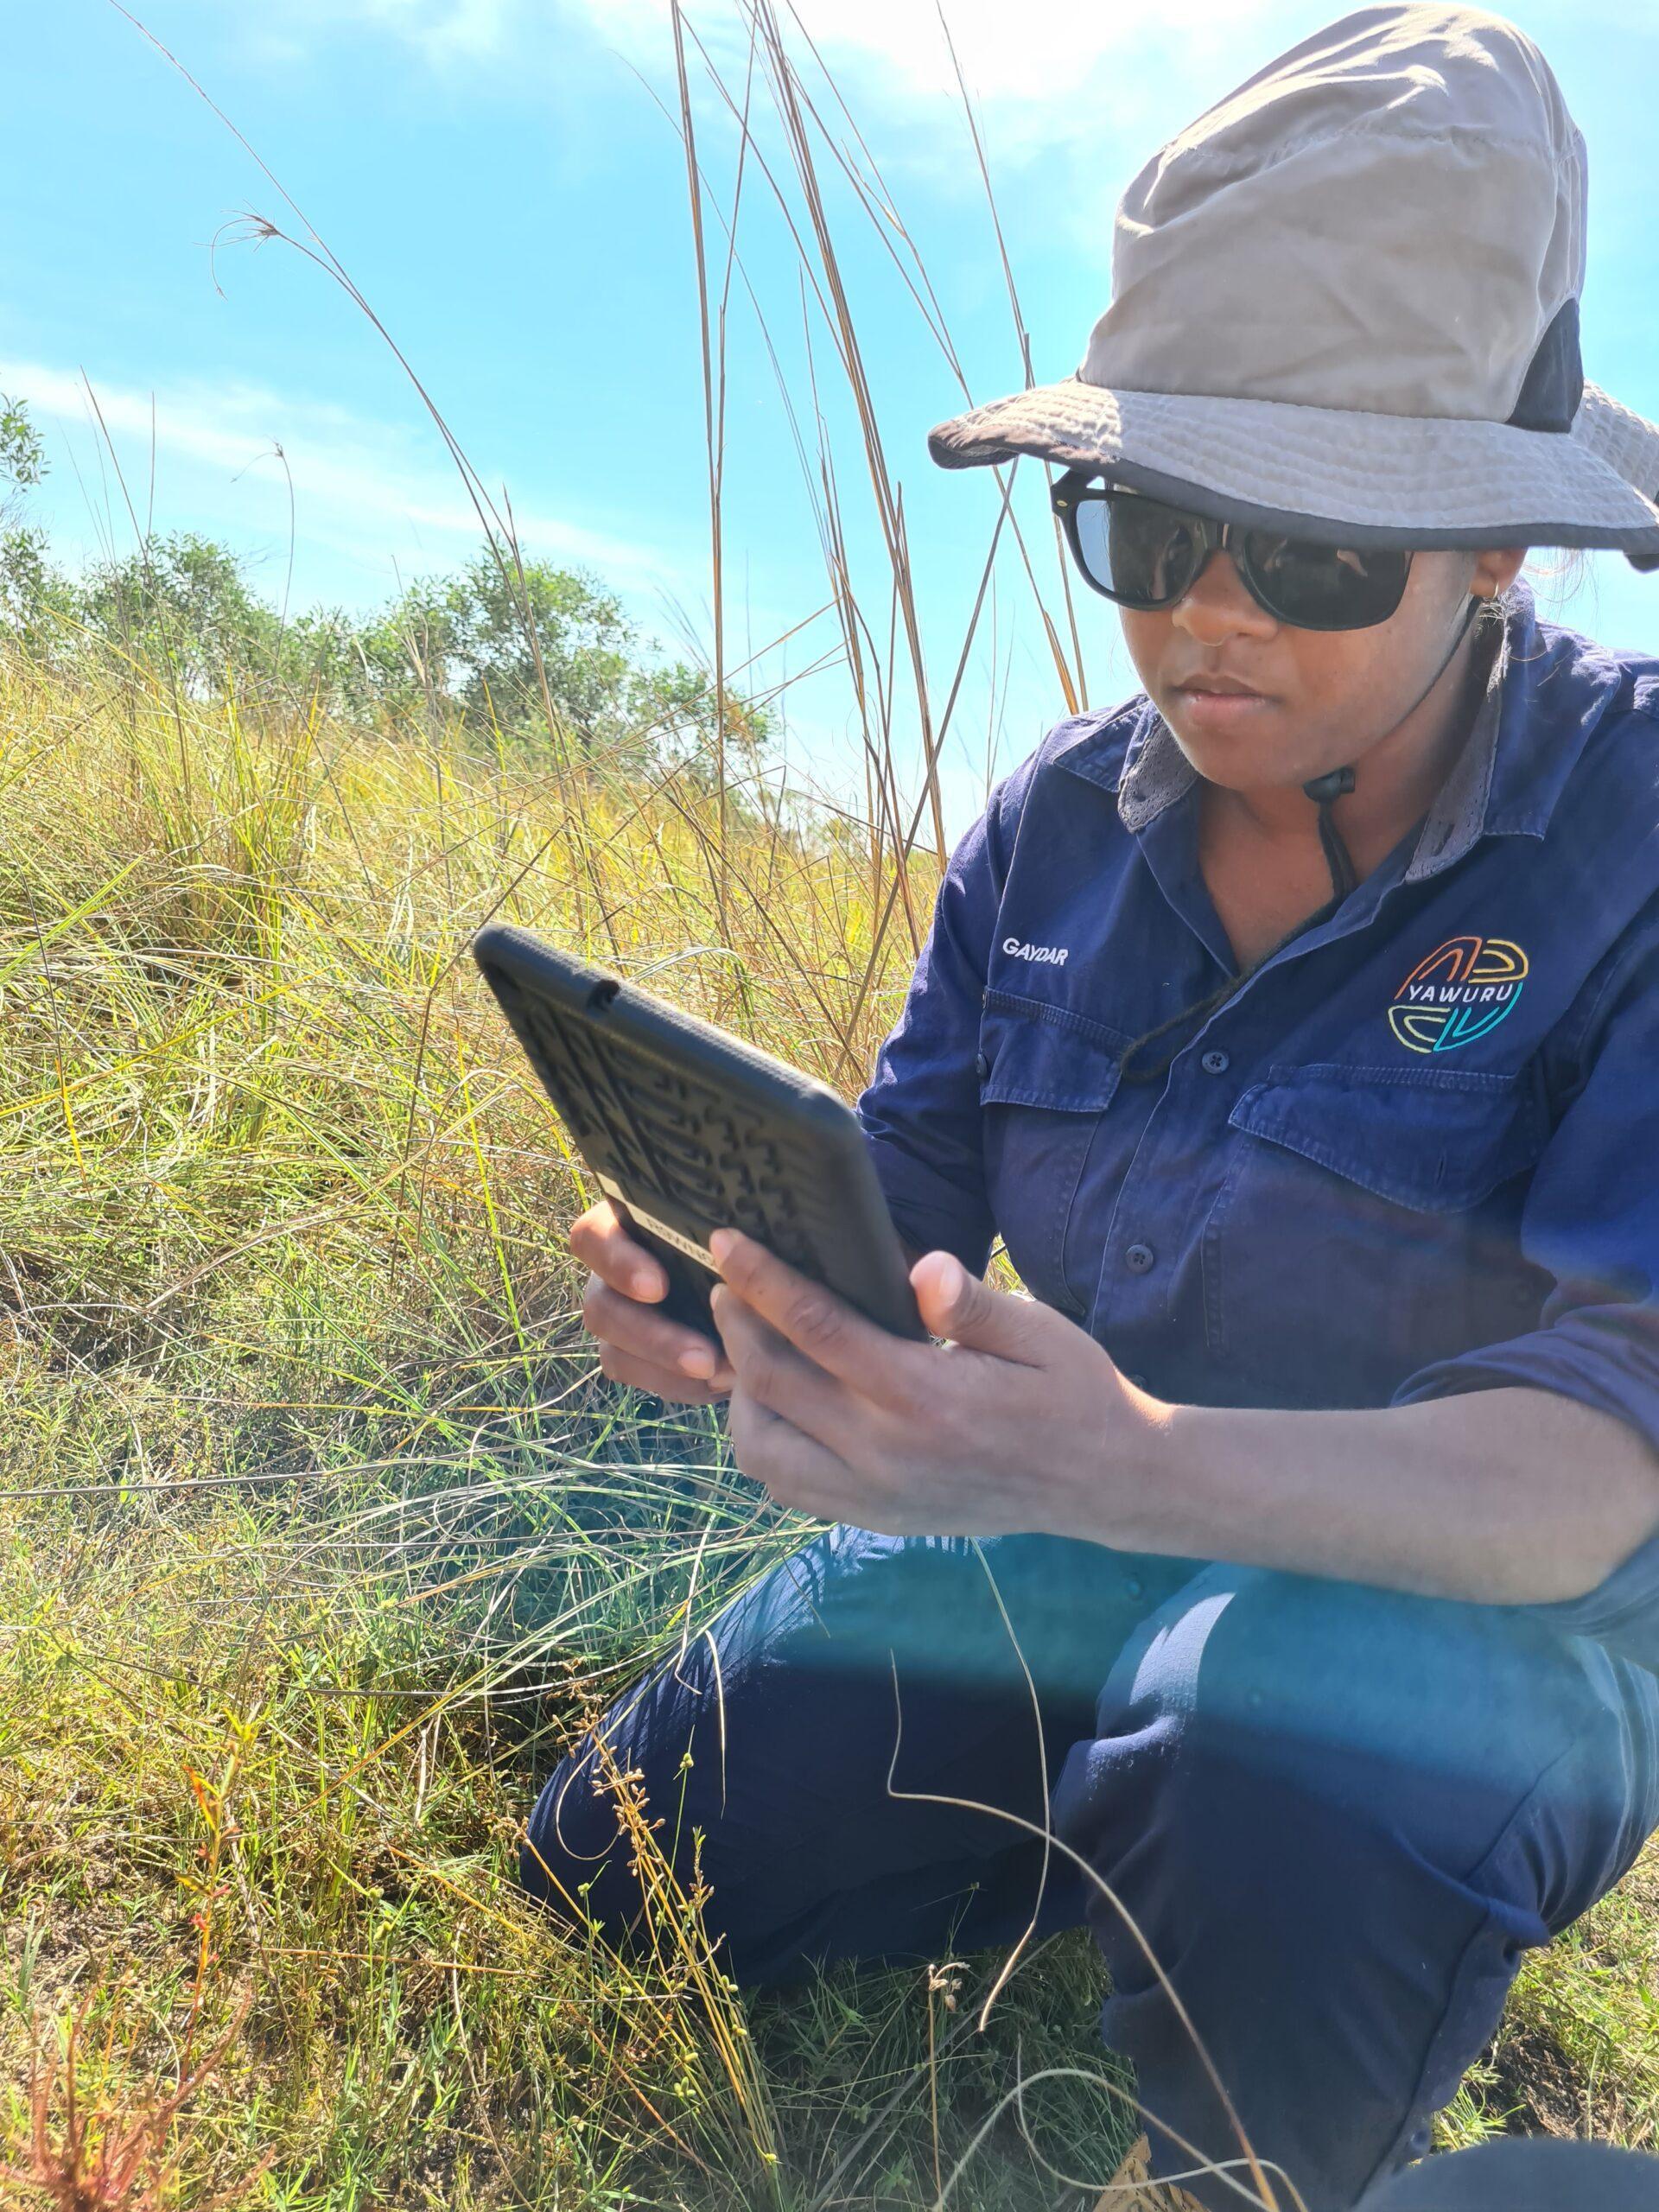 Yawuru Country Manager recording changes on the FULCRUM app. Photo: Rebecca Dobbs.